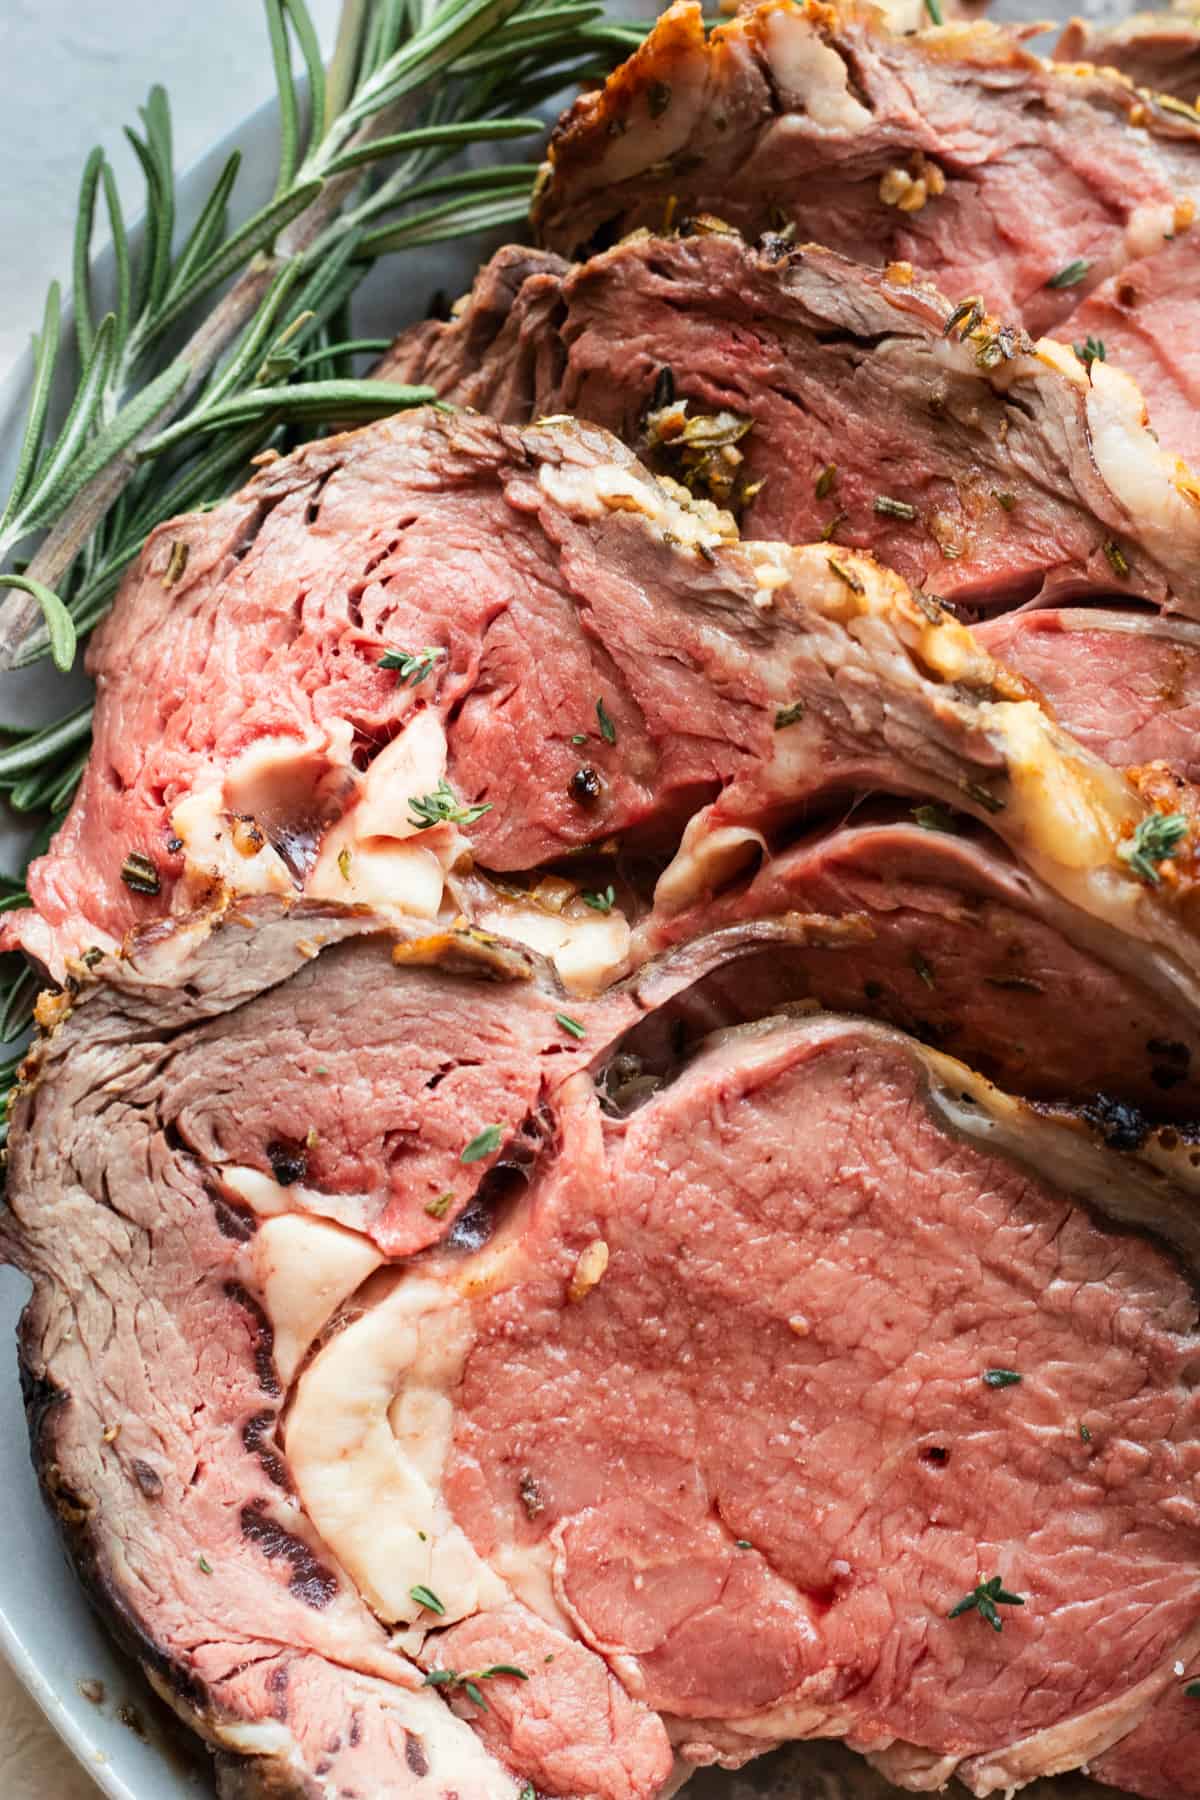 Sliced prime rib served for a special occasion meal.